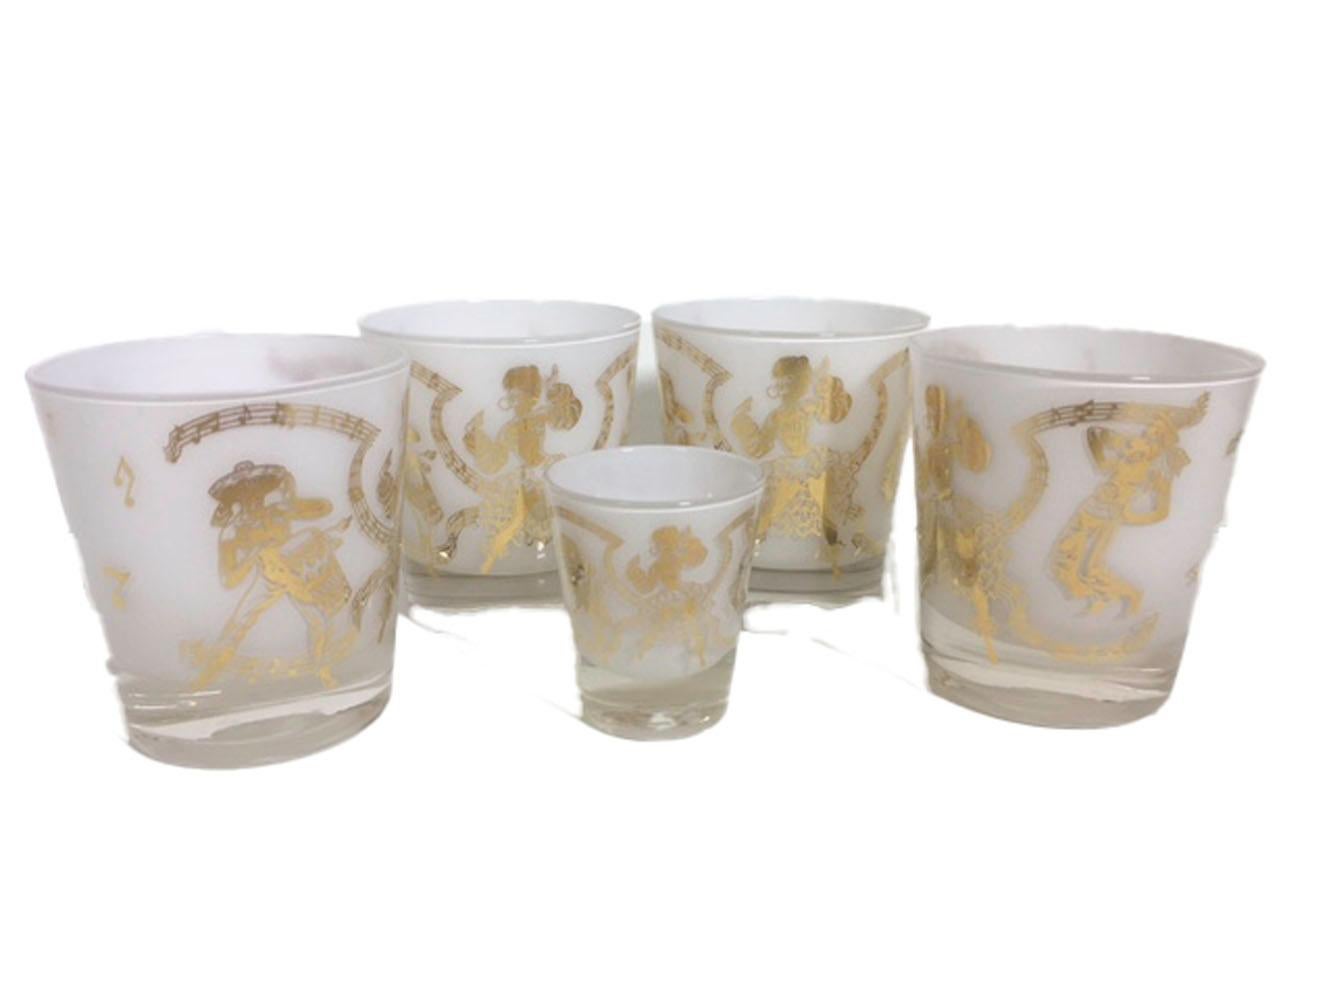 Enameled 13 Piece Calypso Performer, Cocktail Bar Suite Shaker, Pitcher and Glasses For Sale